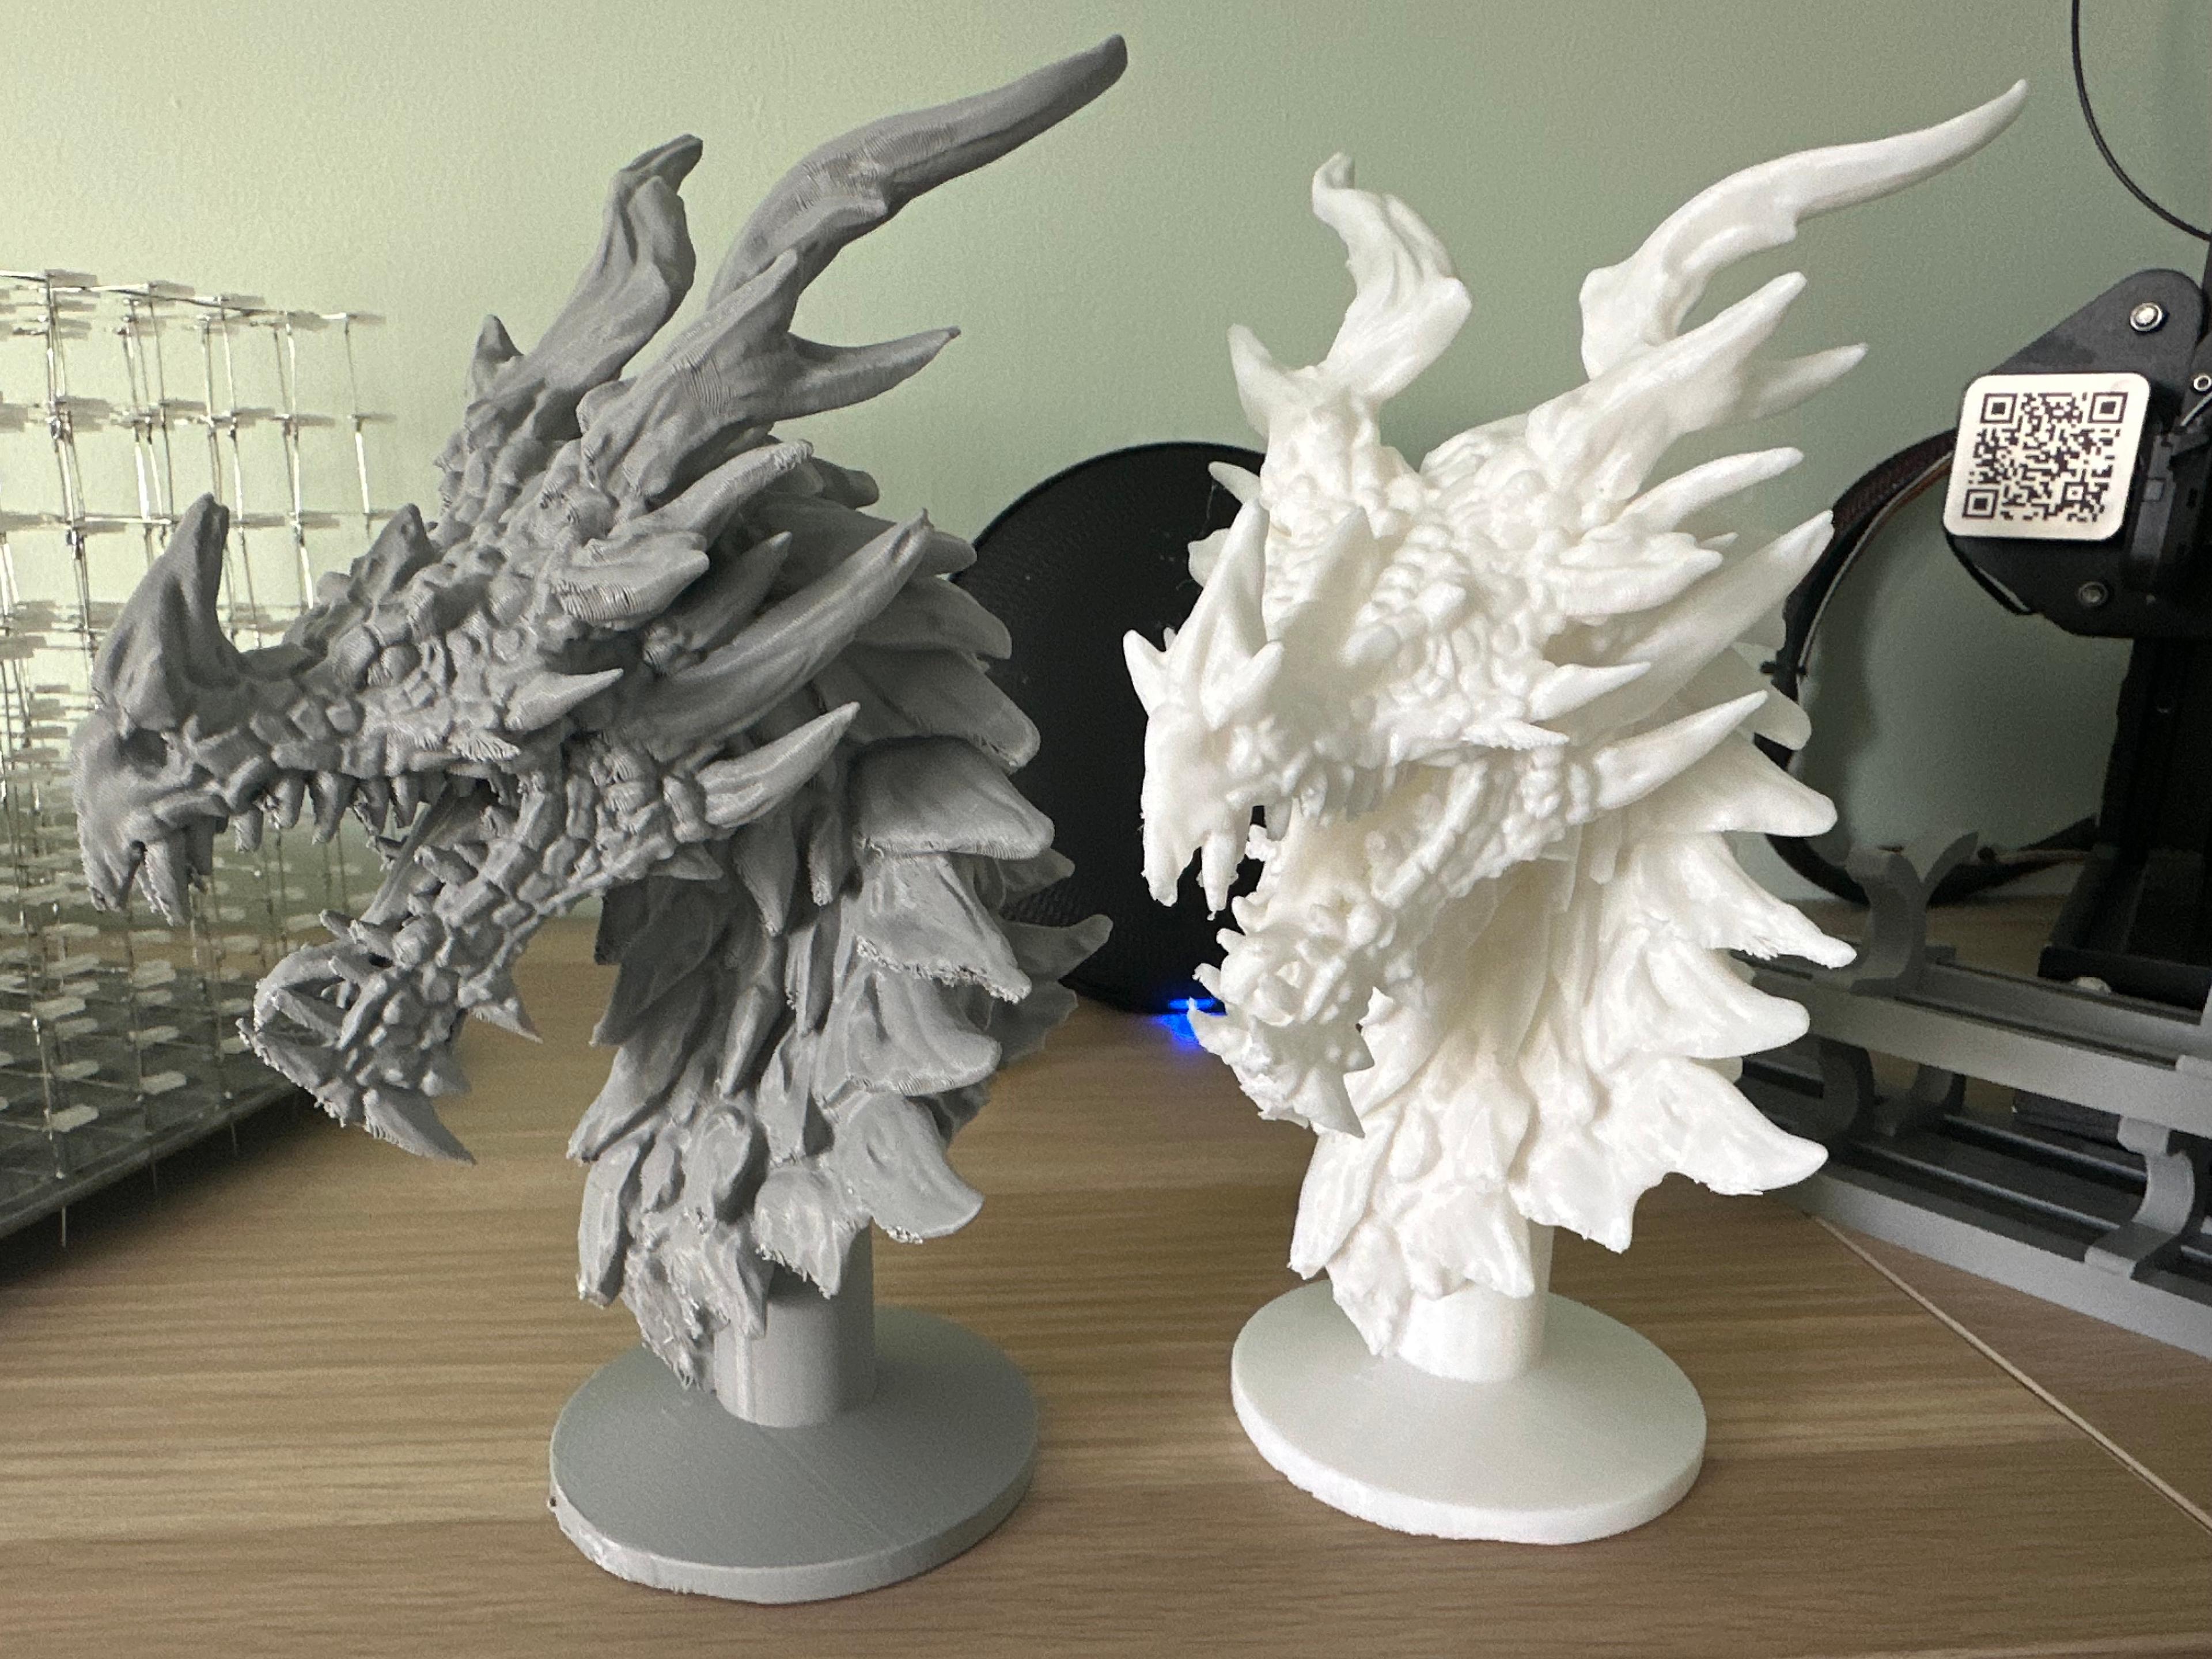 Dragon Head 1 - Fan Art - Decoration - Awesome print thank you, 
6.5 hours print PLA base & interface supports.
Bambu X1  using tree auto.
print with nose and base on plate to reduce supports needed. - 3d model